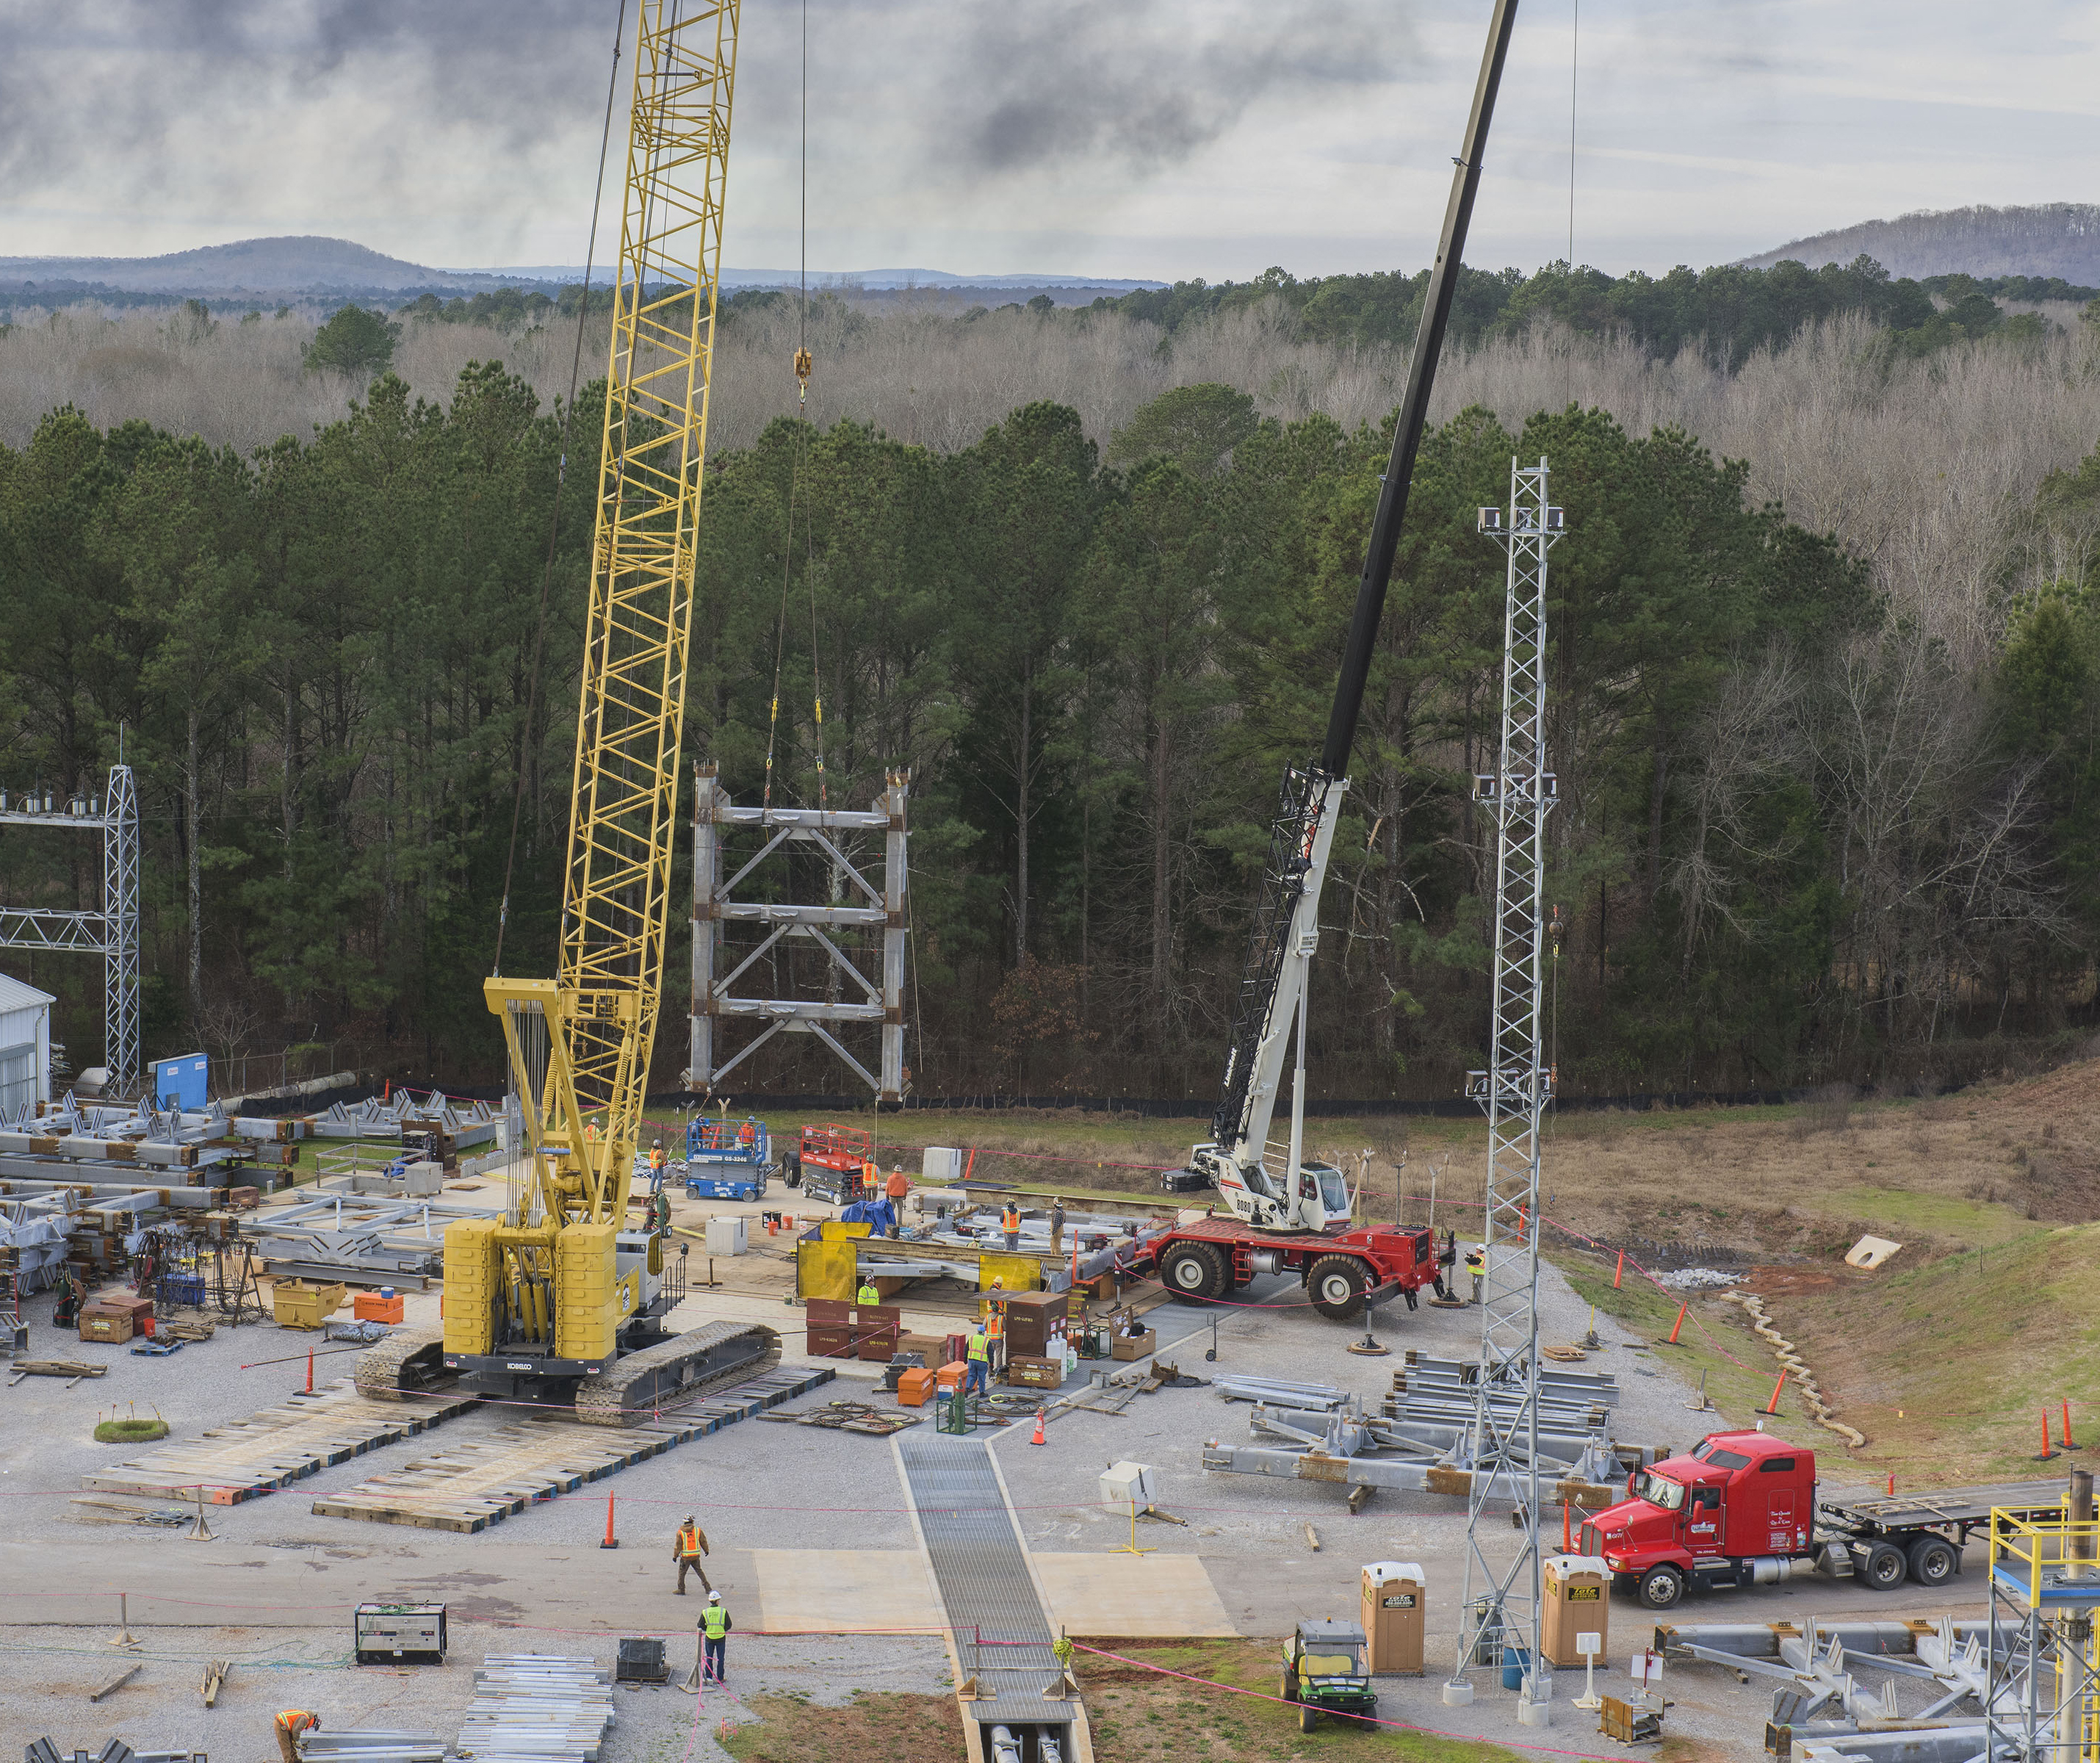 Second SLS Test Stand Begins Rise at NASA Marshall